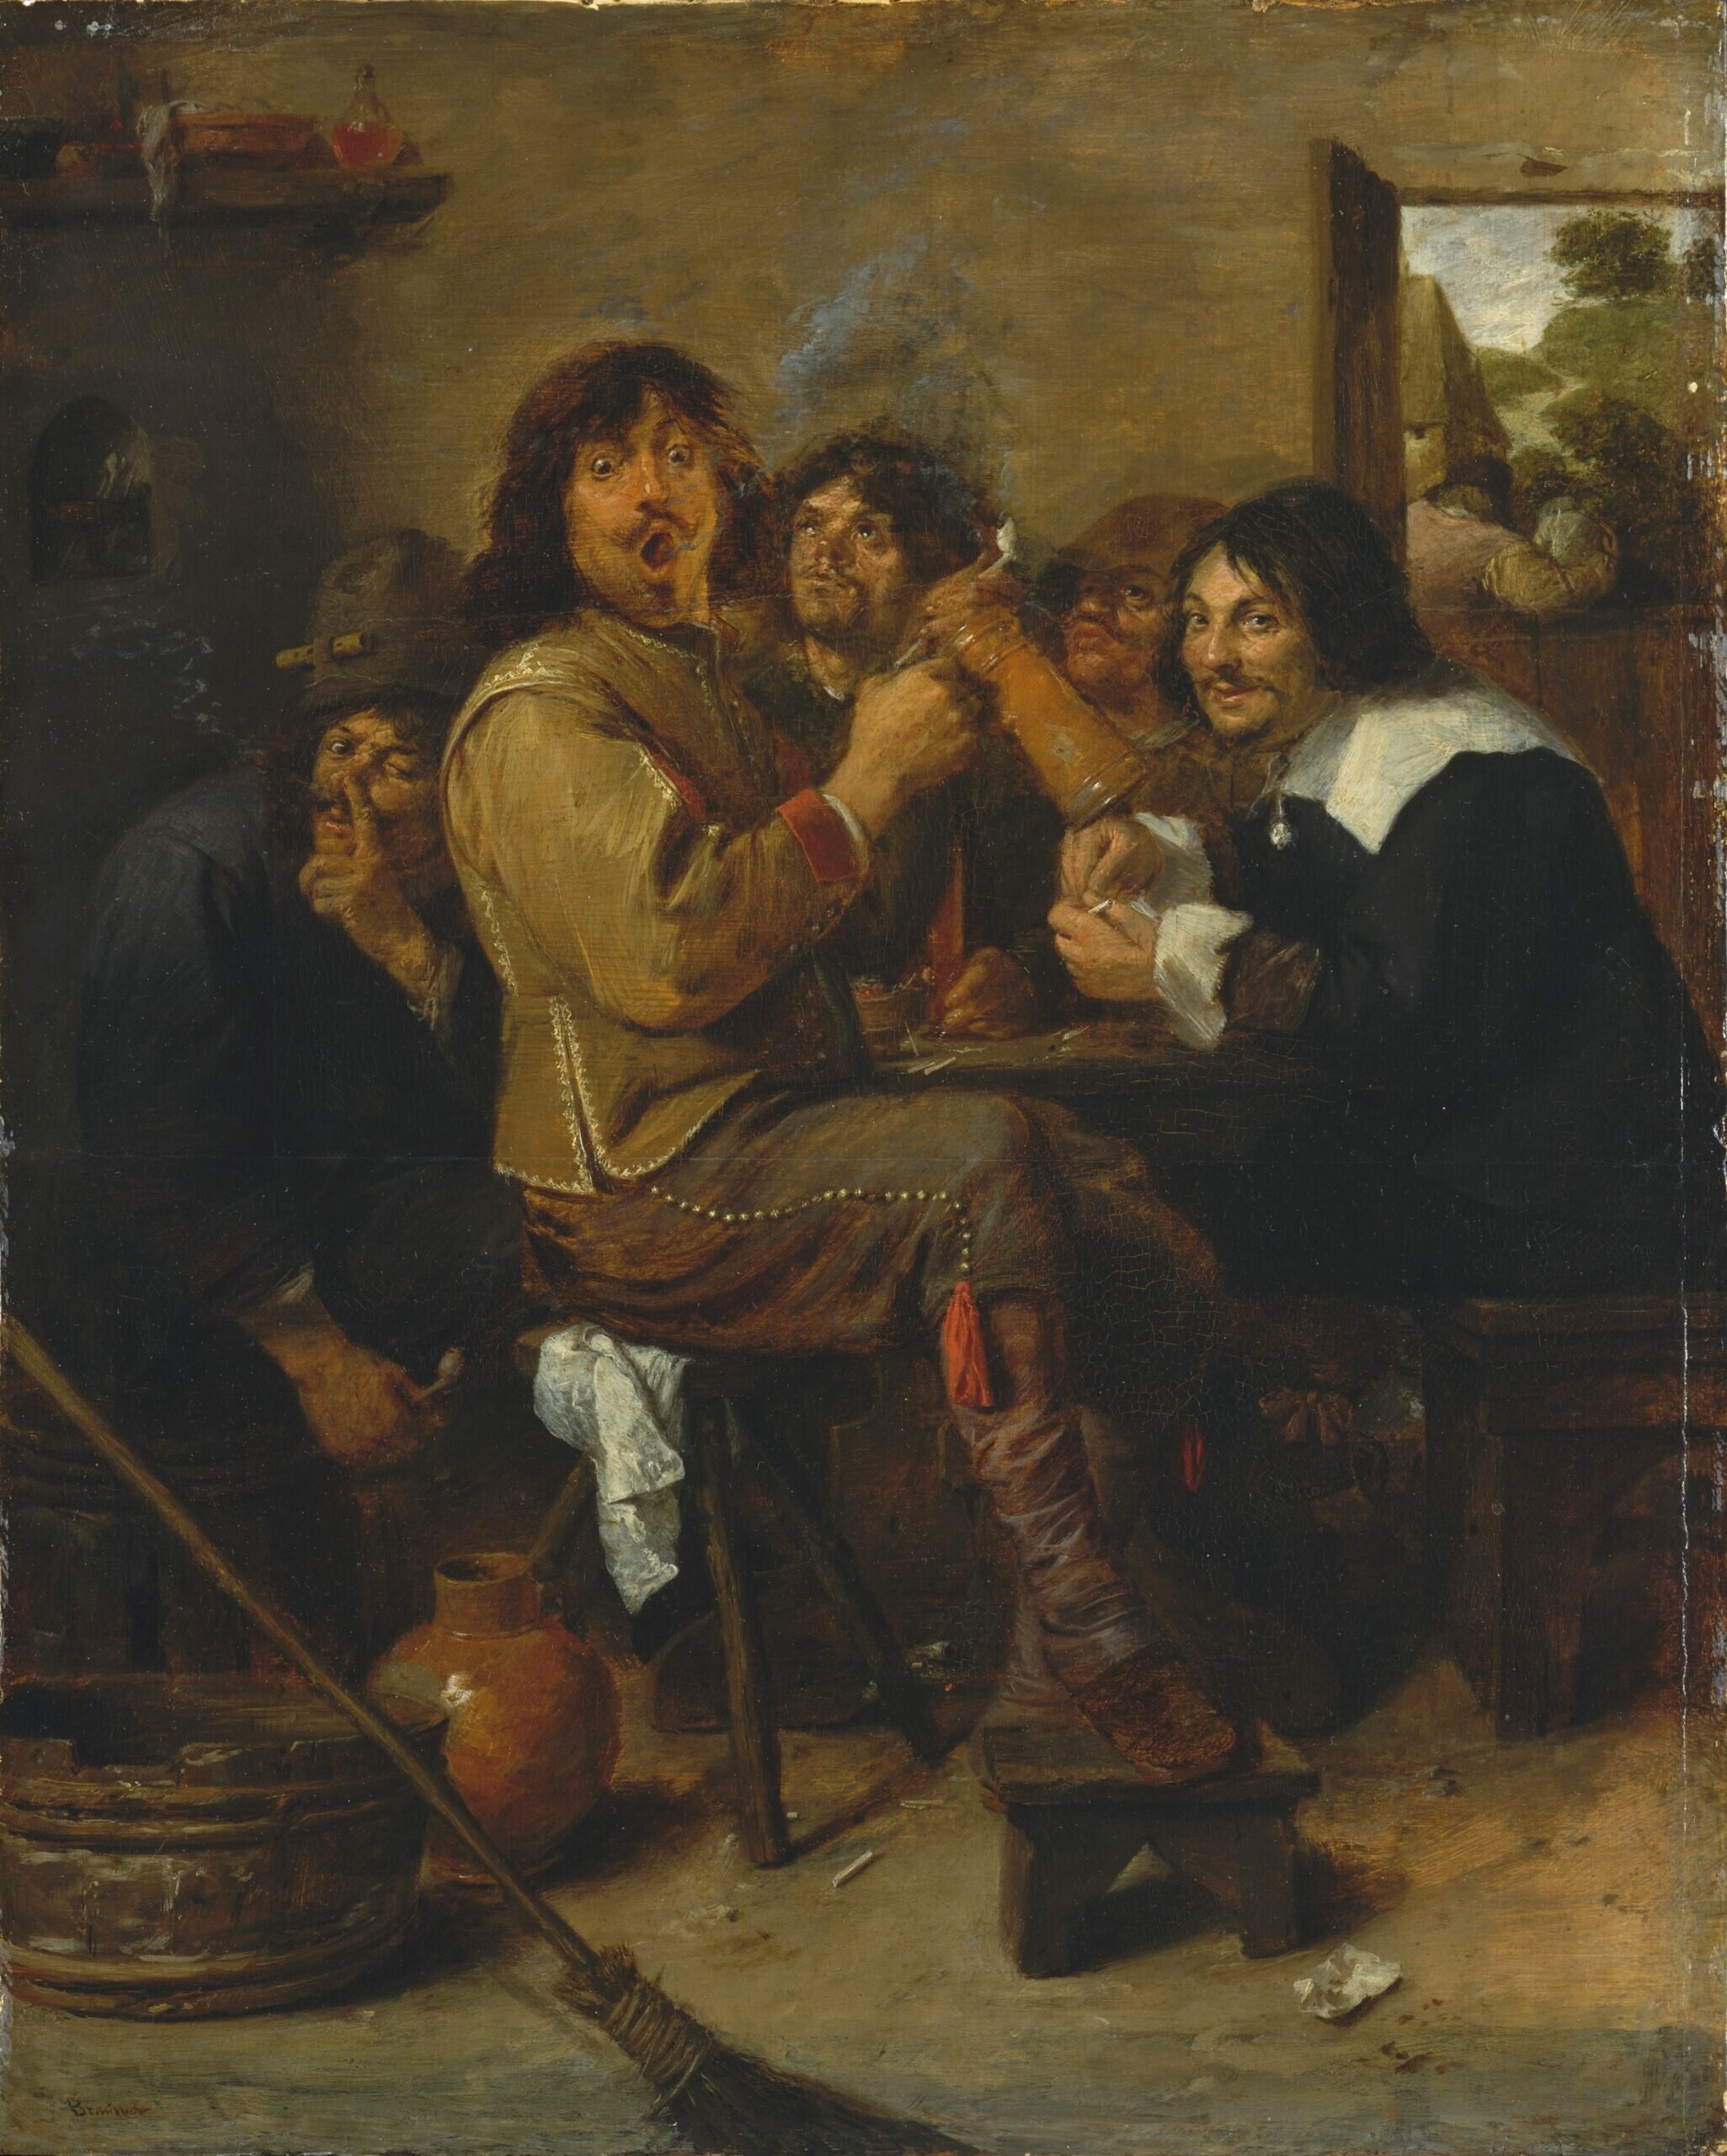 Adriaen_Brower_-_The_Smokers-scaled.jpg